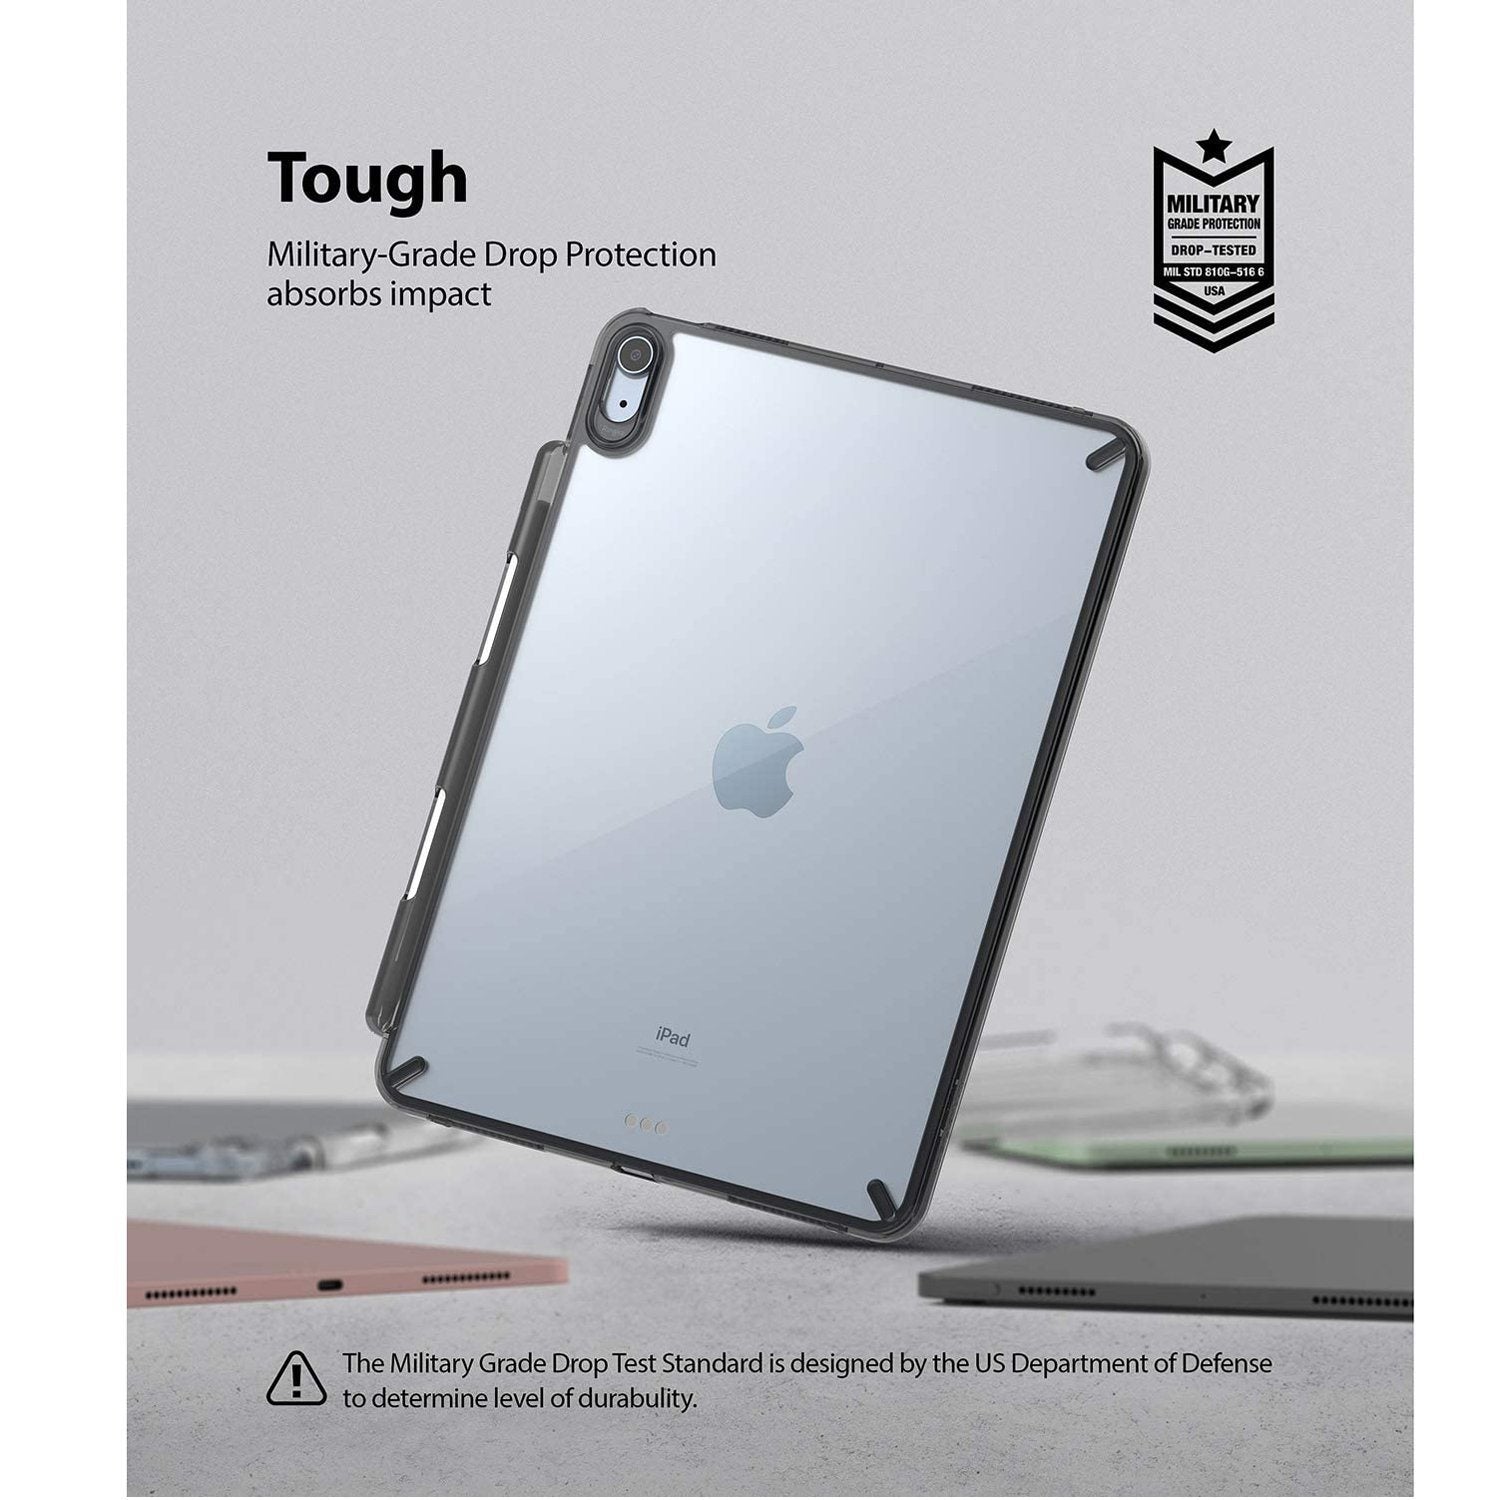 Ringke Fusion Case for iPad Air 10.9"(2022/2020), Clear/Smoke